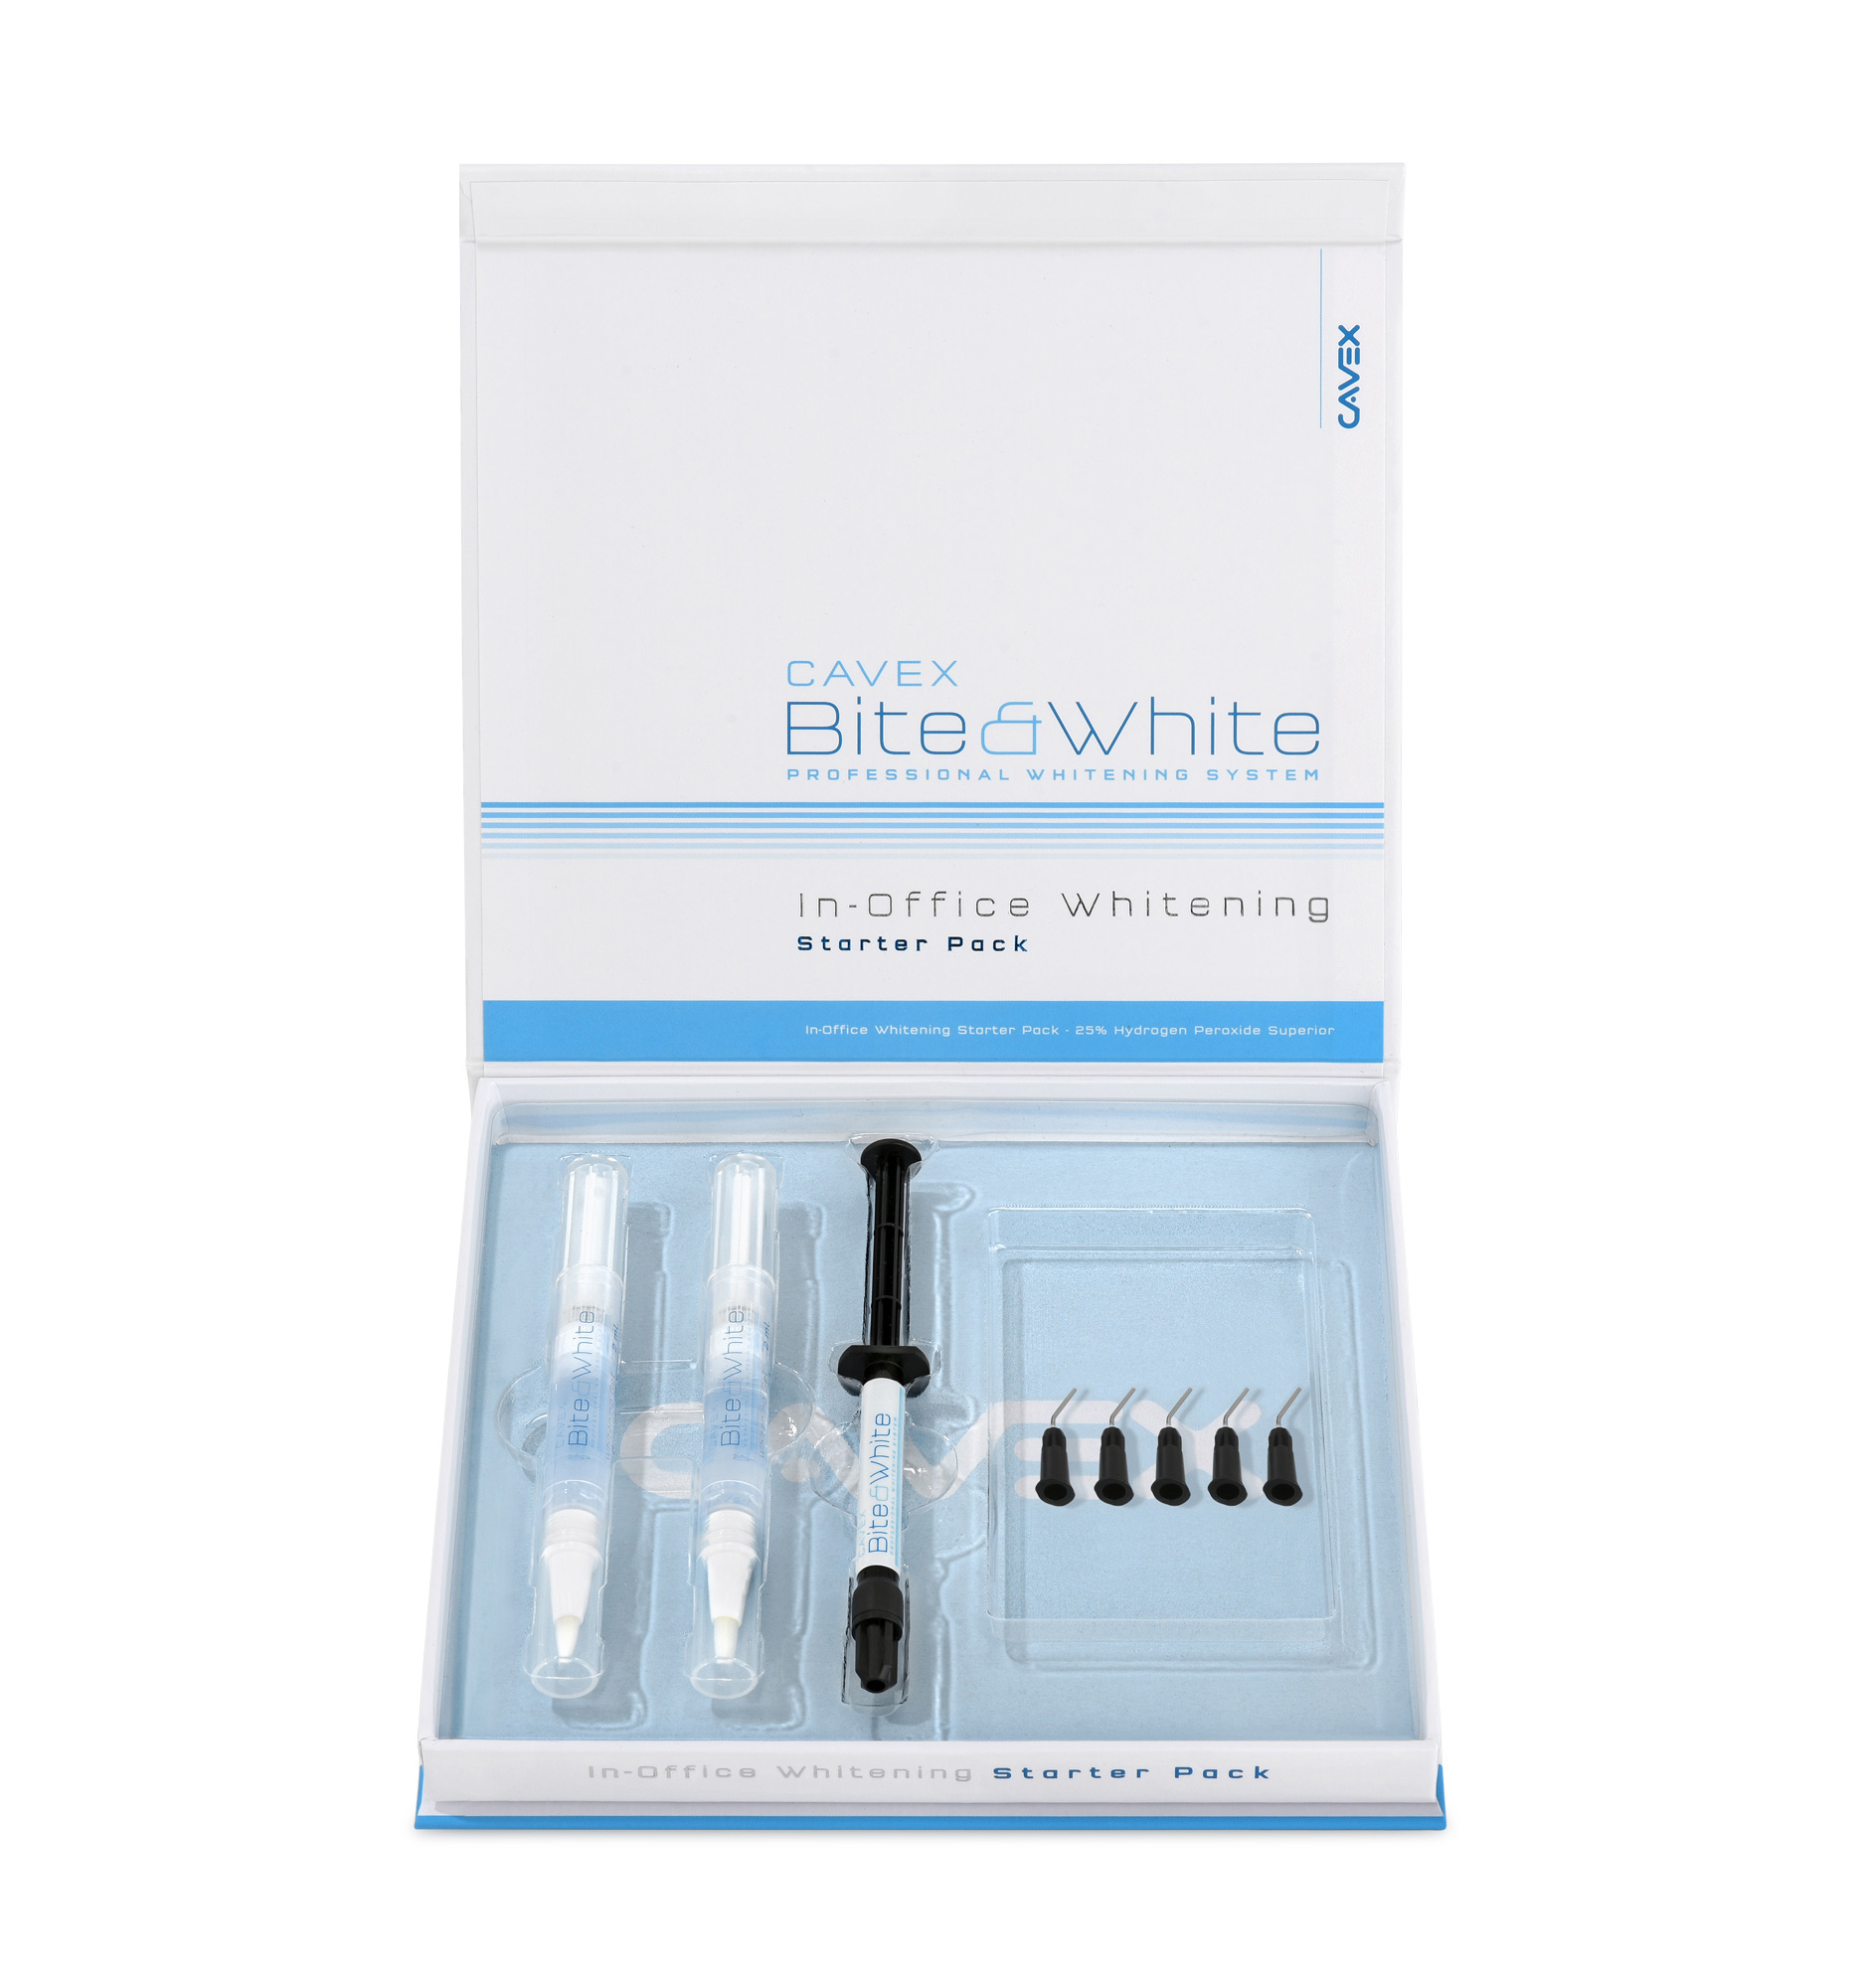 In-Office Whitening Products, Supplies and Equipment